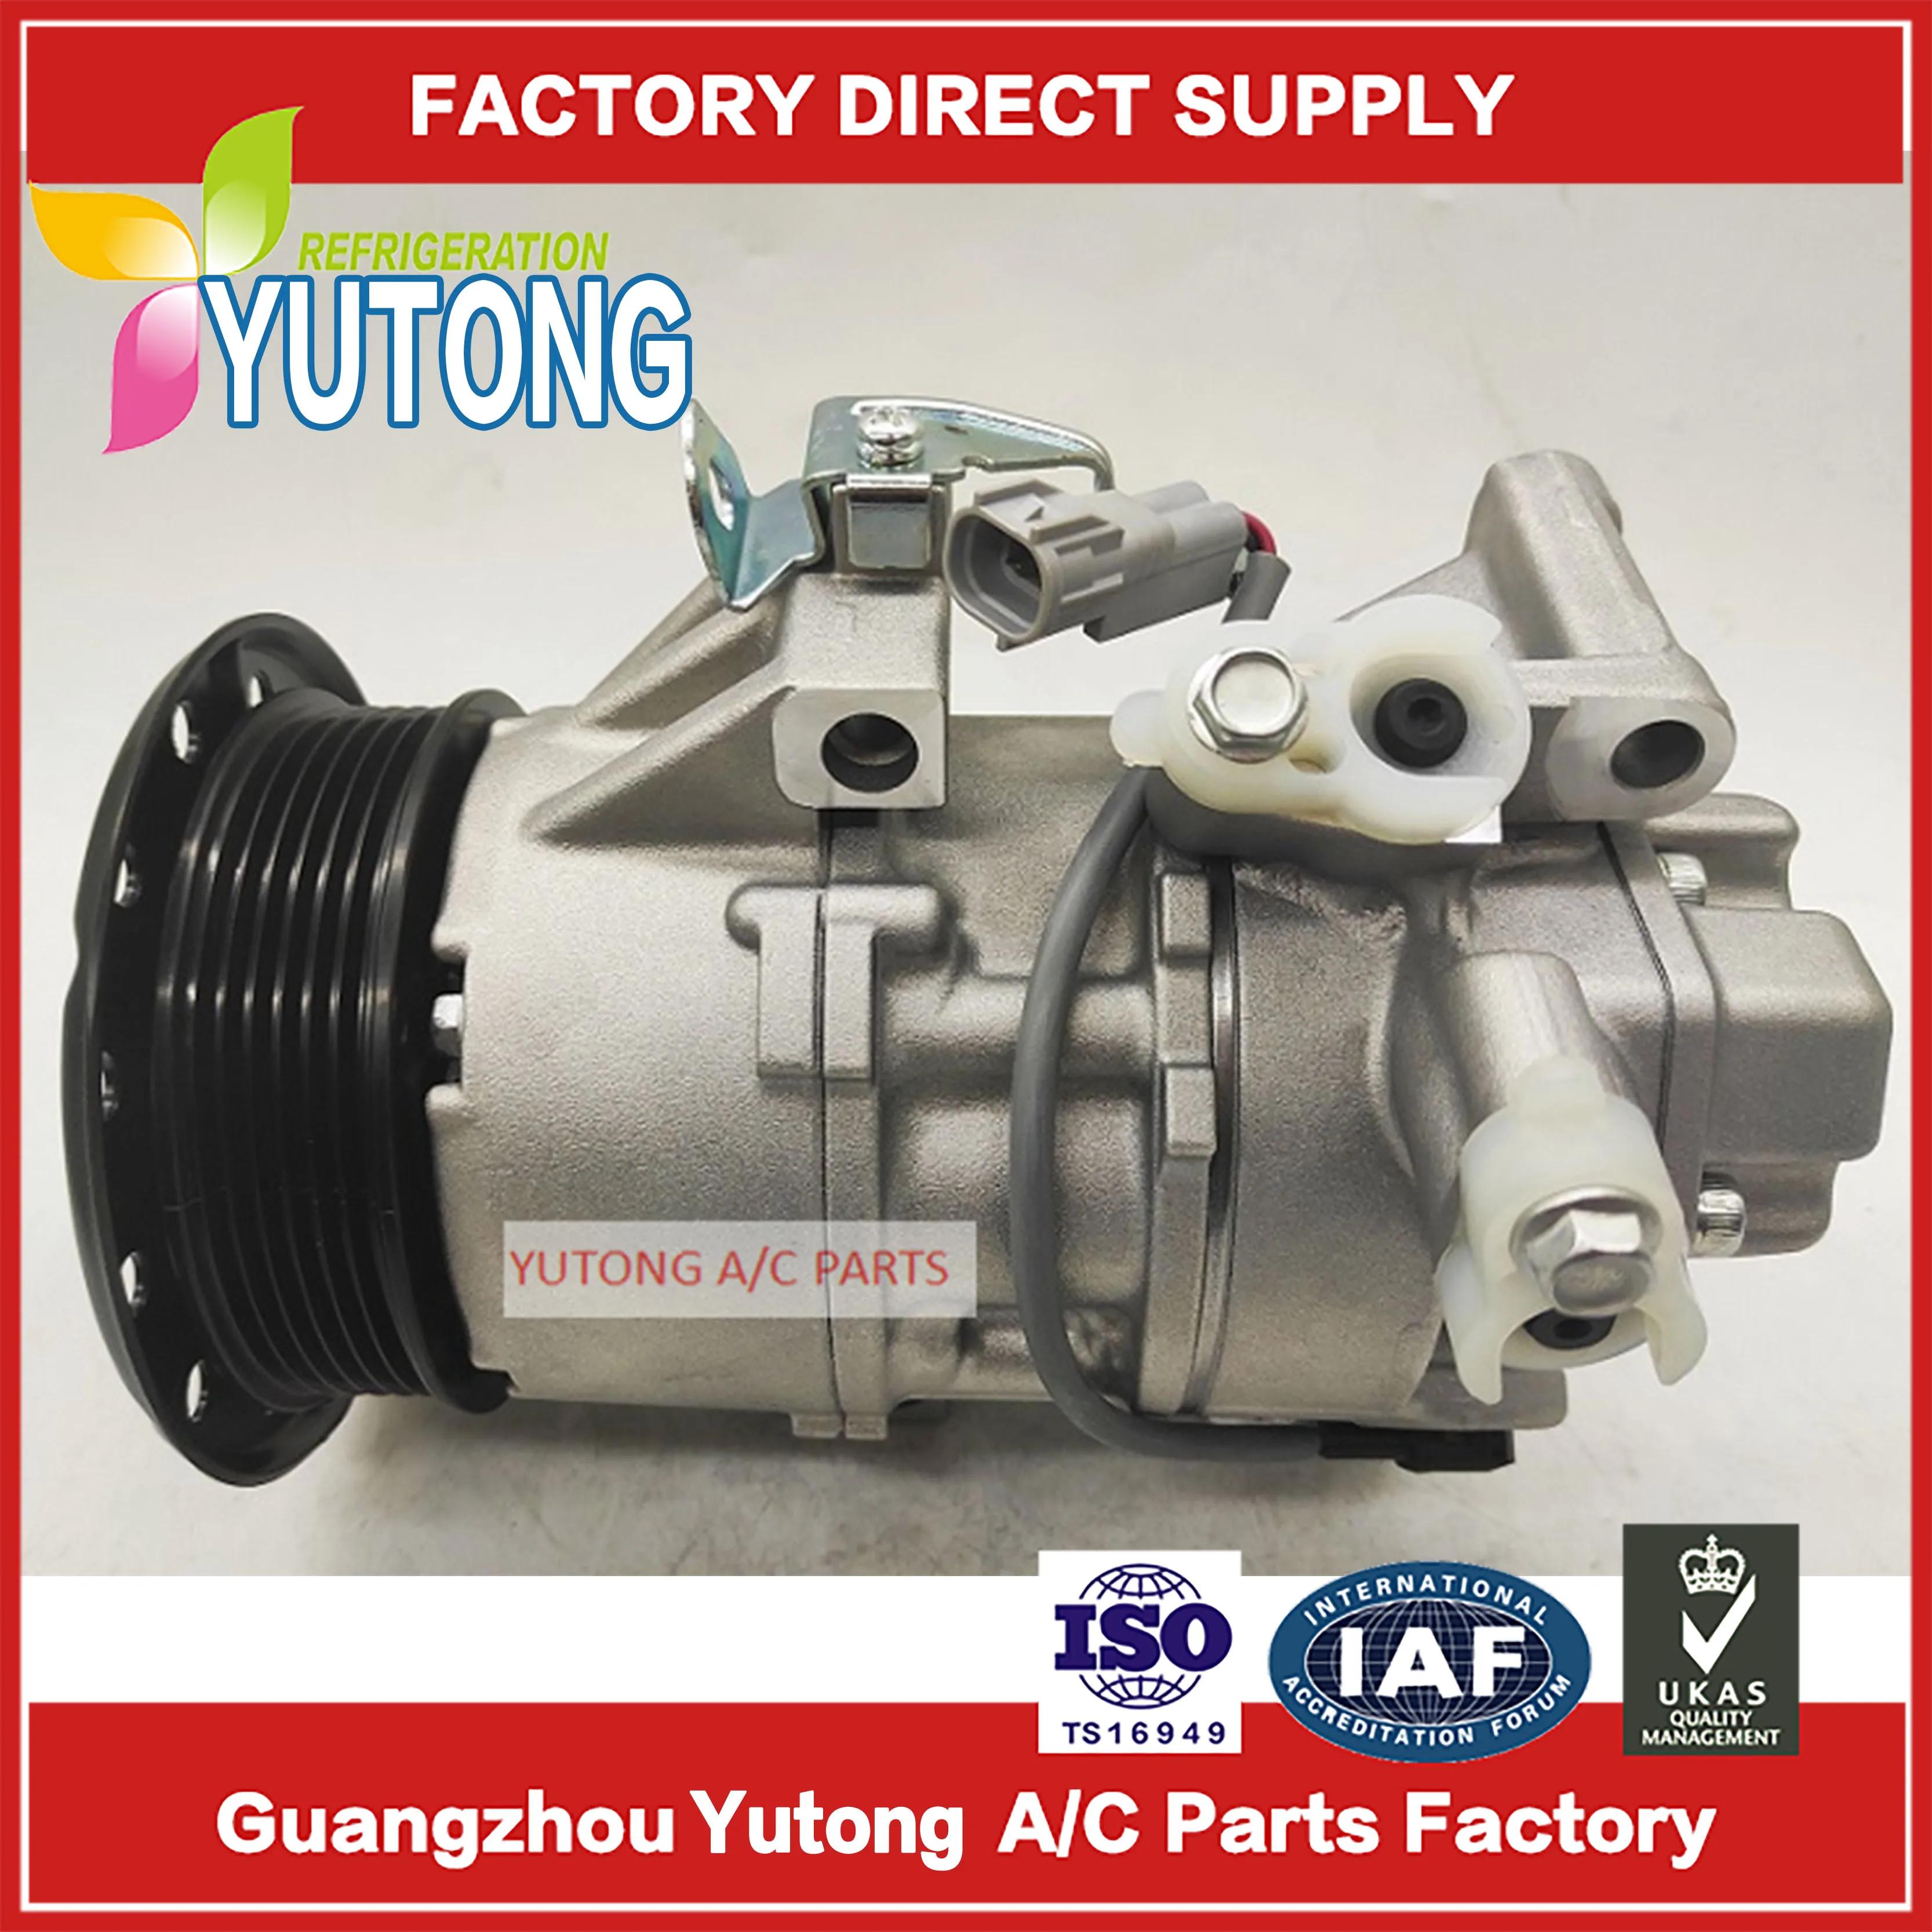 Yairs AC , 447190-5223, 447190-5222, 447190-5221, 447190-5220, DCP50304, DCP50305, DCP50246